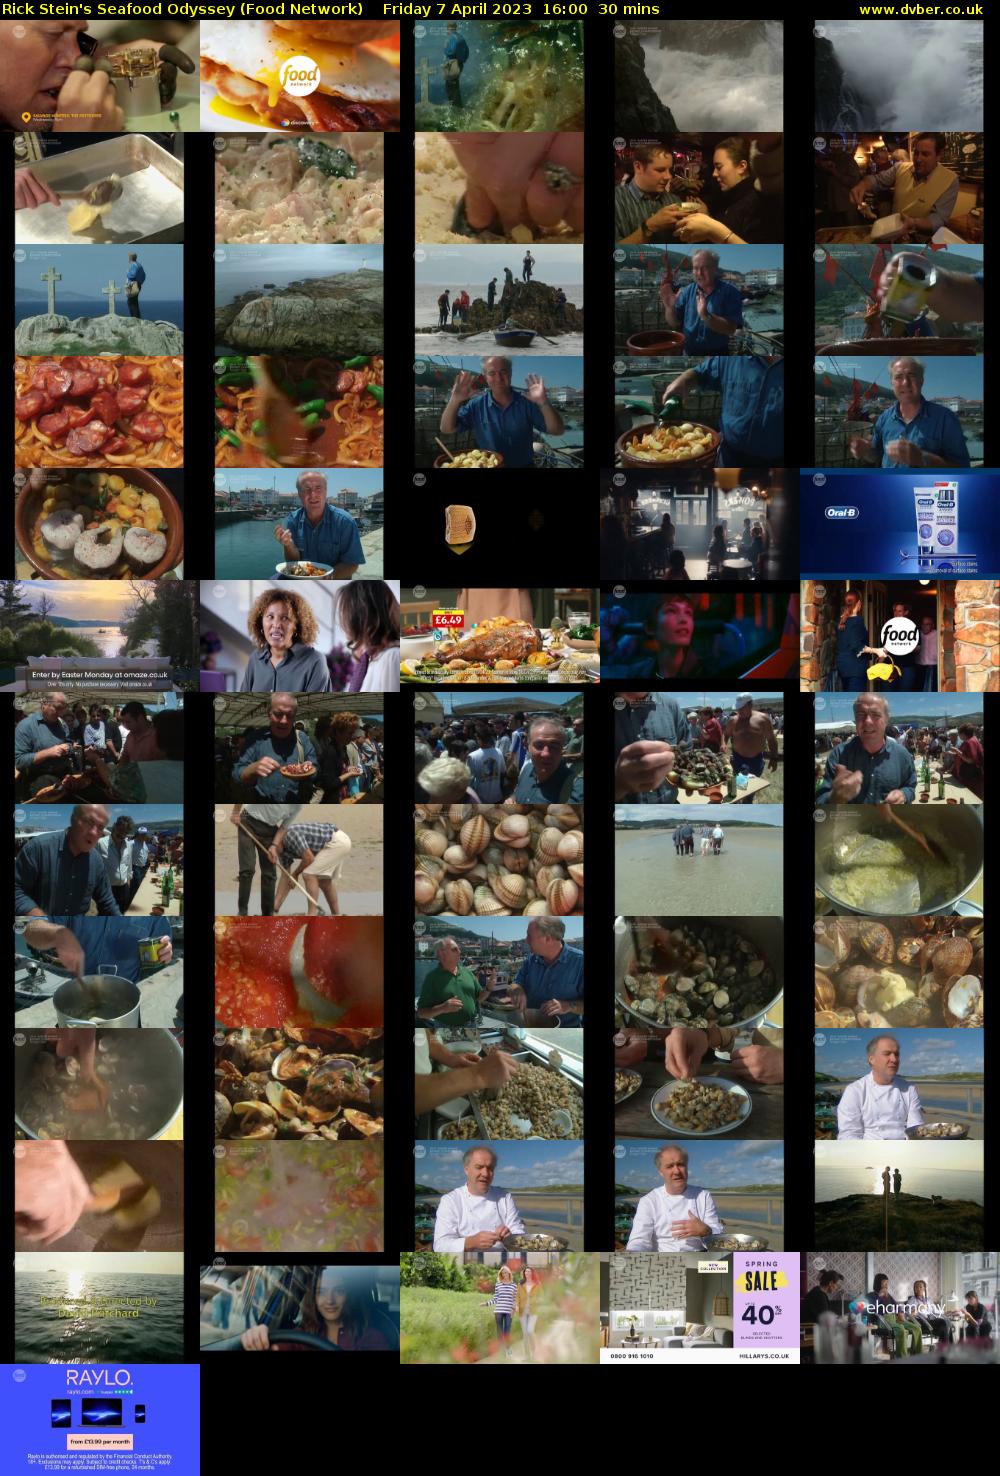 Rick Stein's Seafood Odyssey (Food Network) Friday 7 April 2023 16:00 - 16:30